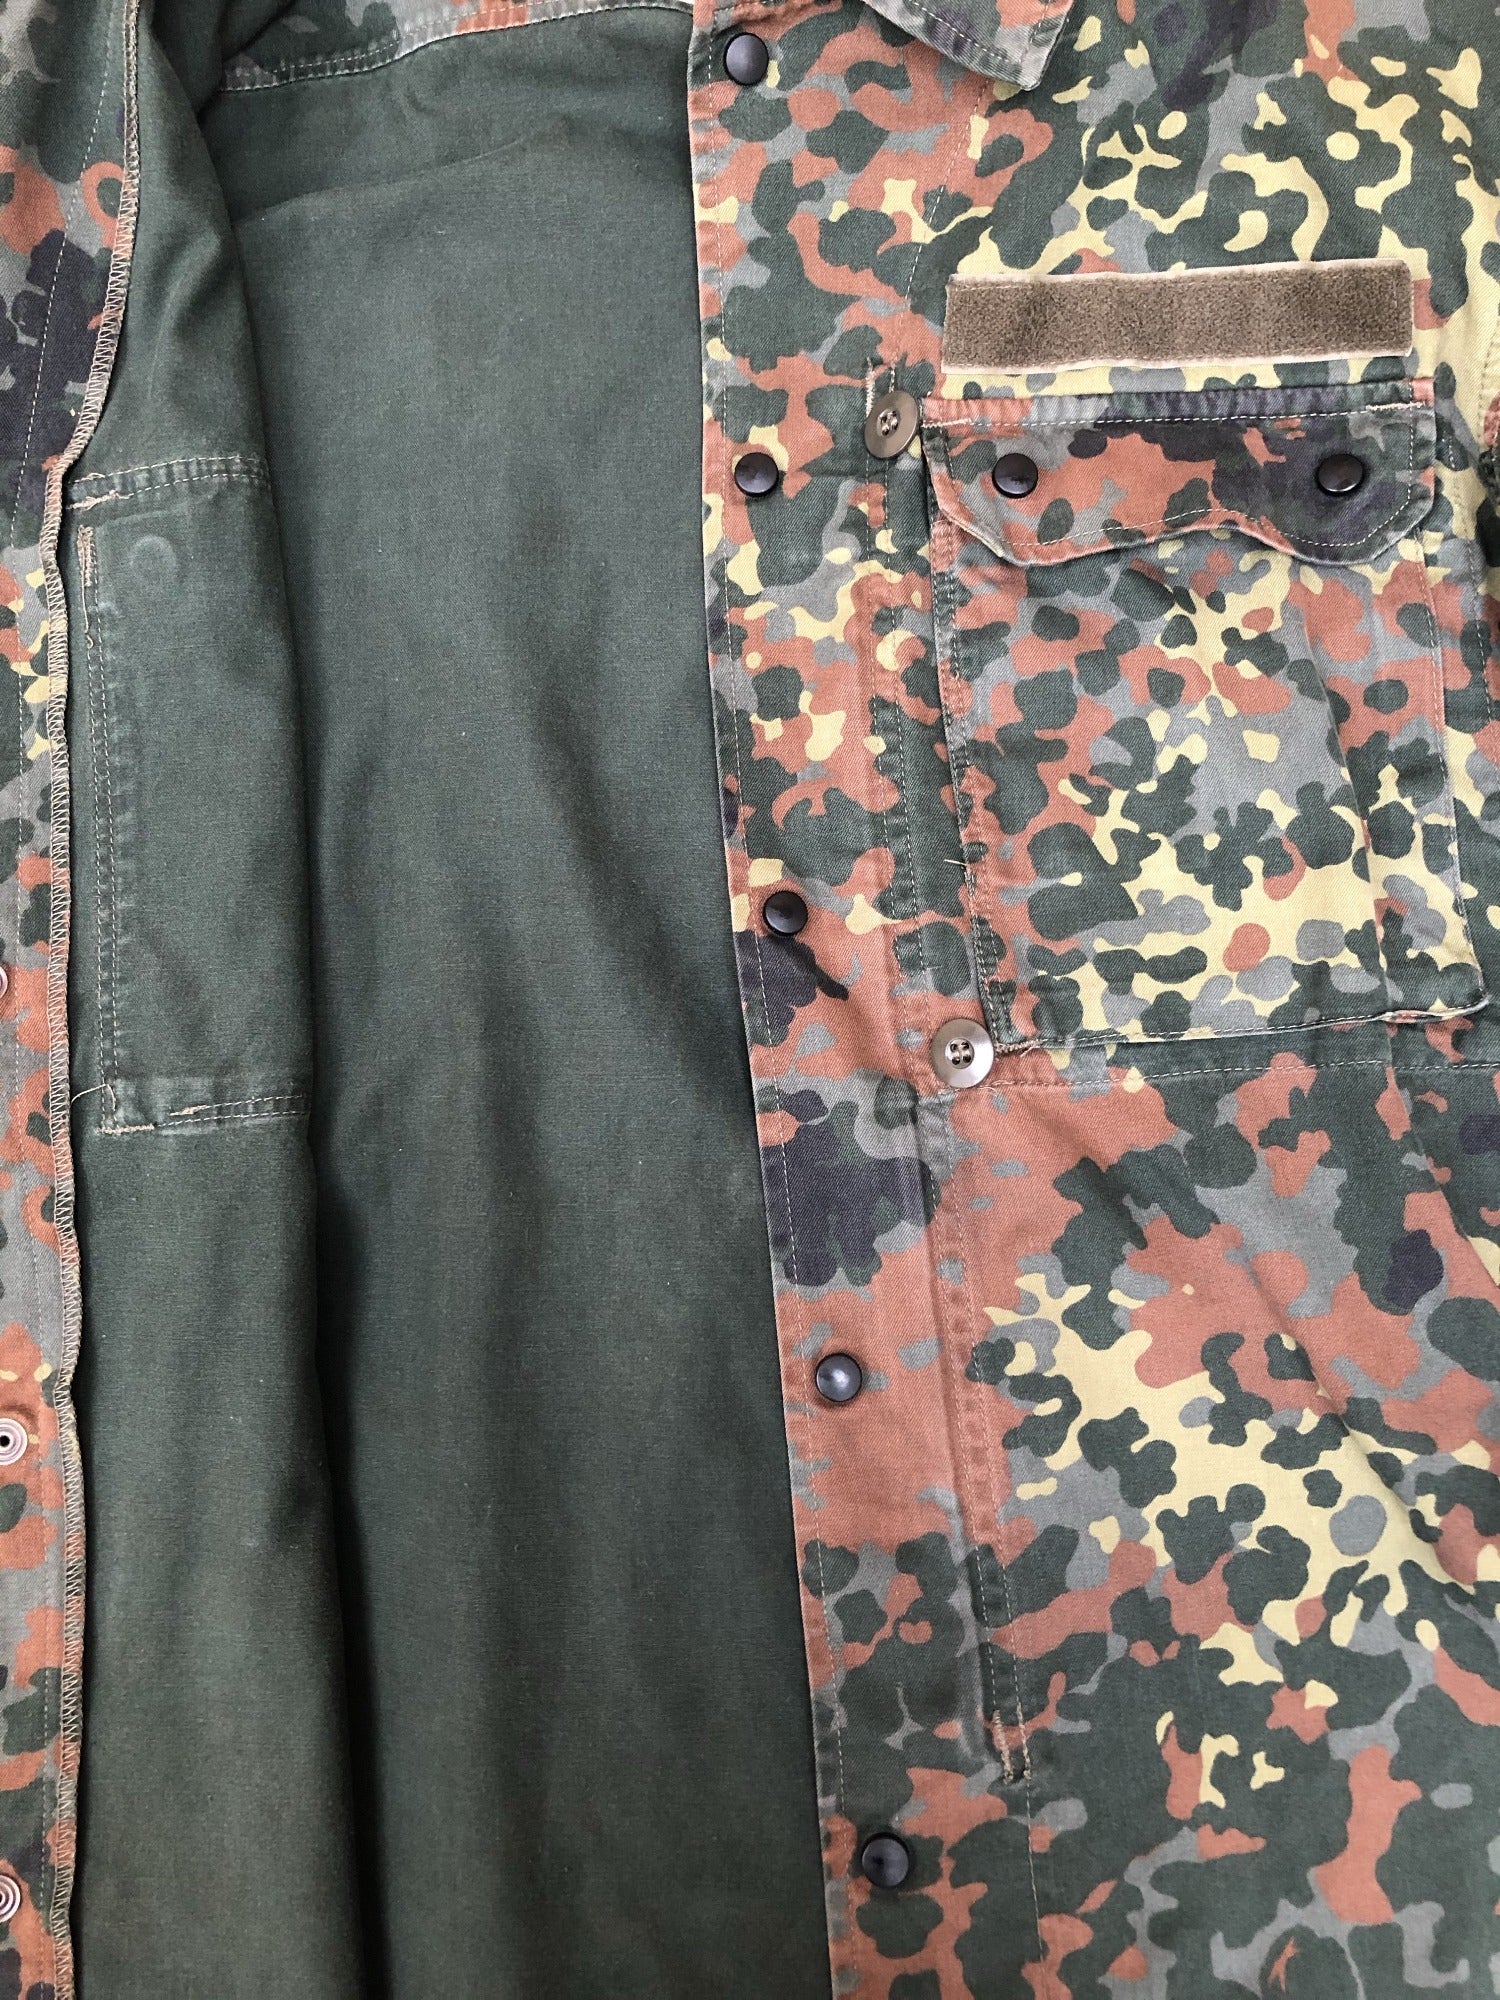 Mens Military Shirt Camouflage - Size Small - Urban Village Vintage